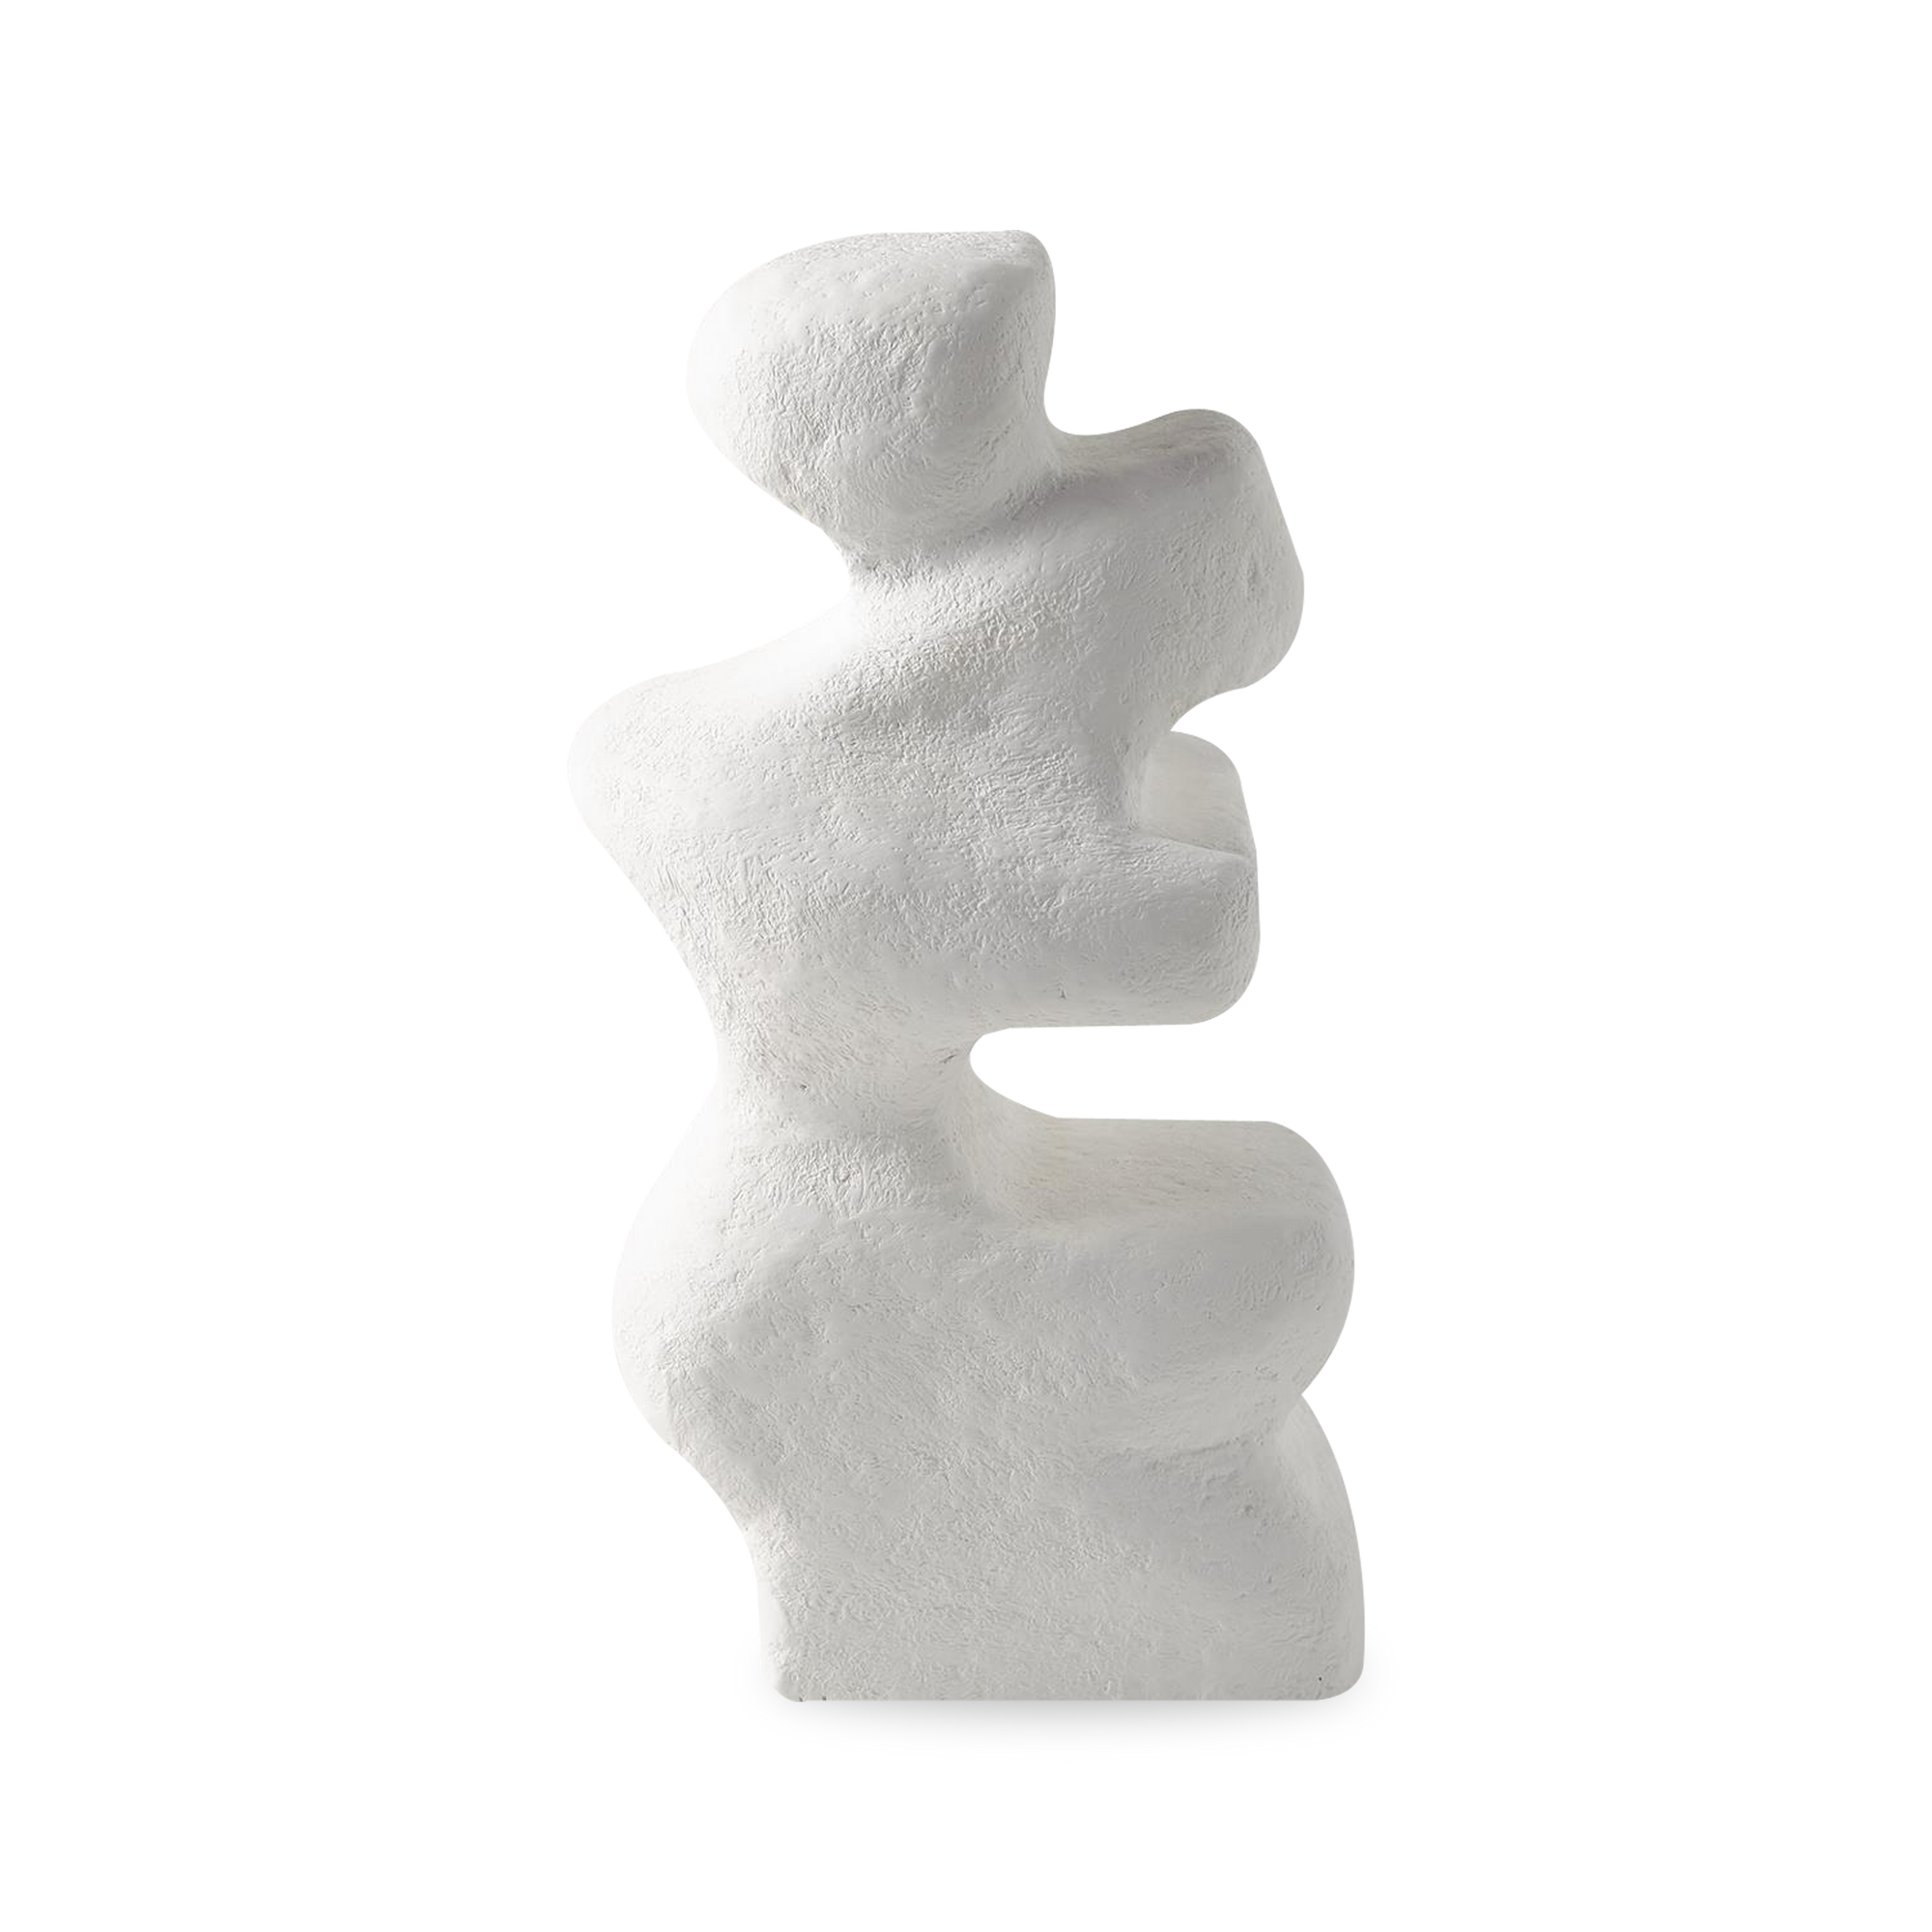 Inspired by the beautiful work of Arps and other modernist sculptors, The Organic Concrete Sculpture acts like a piece of fine art.